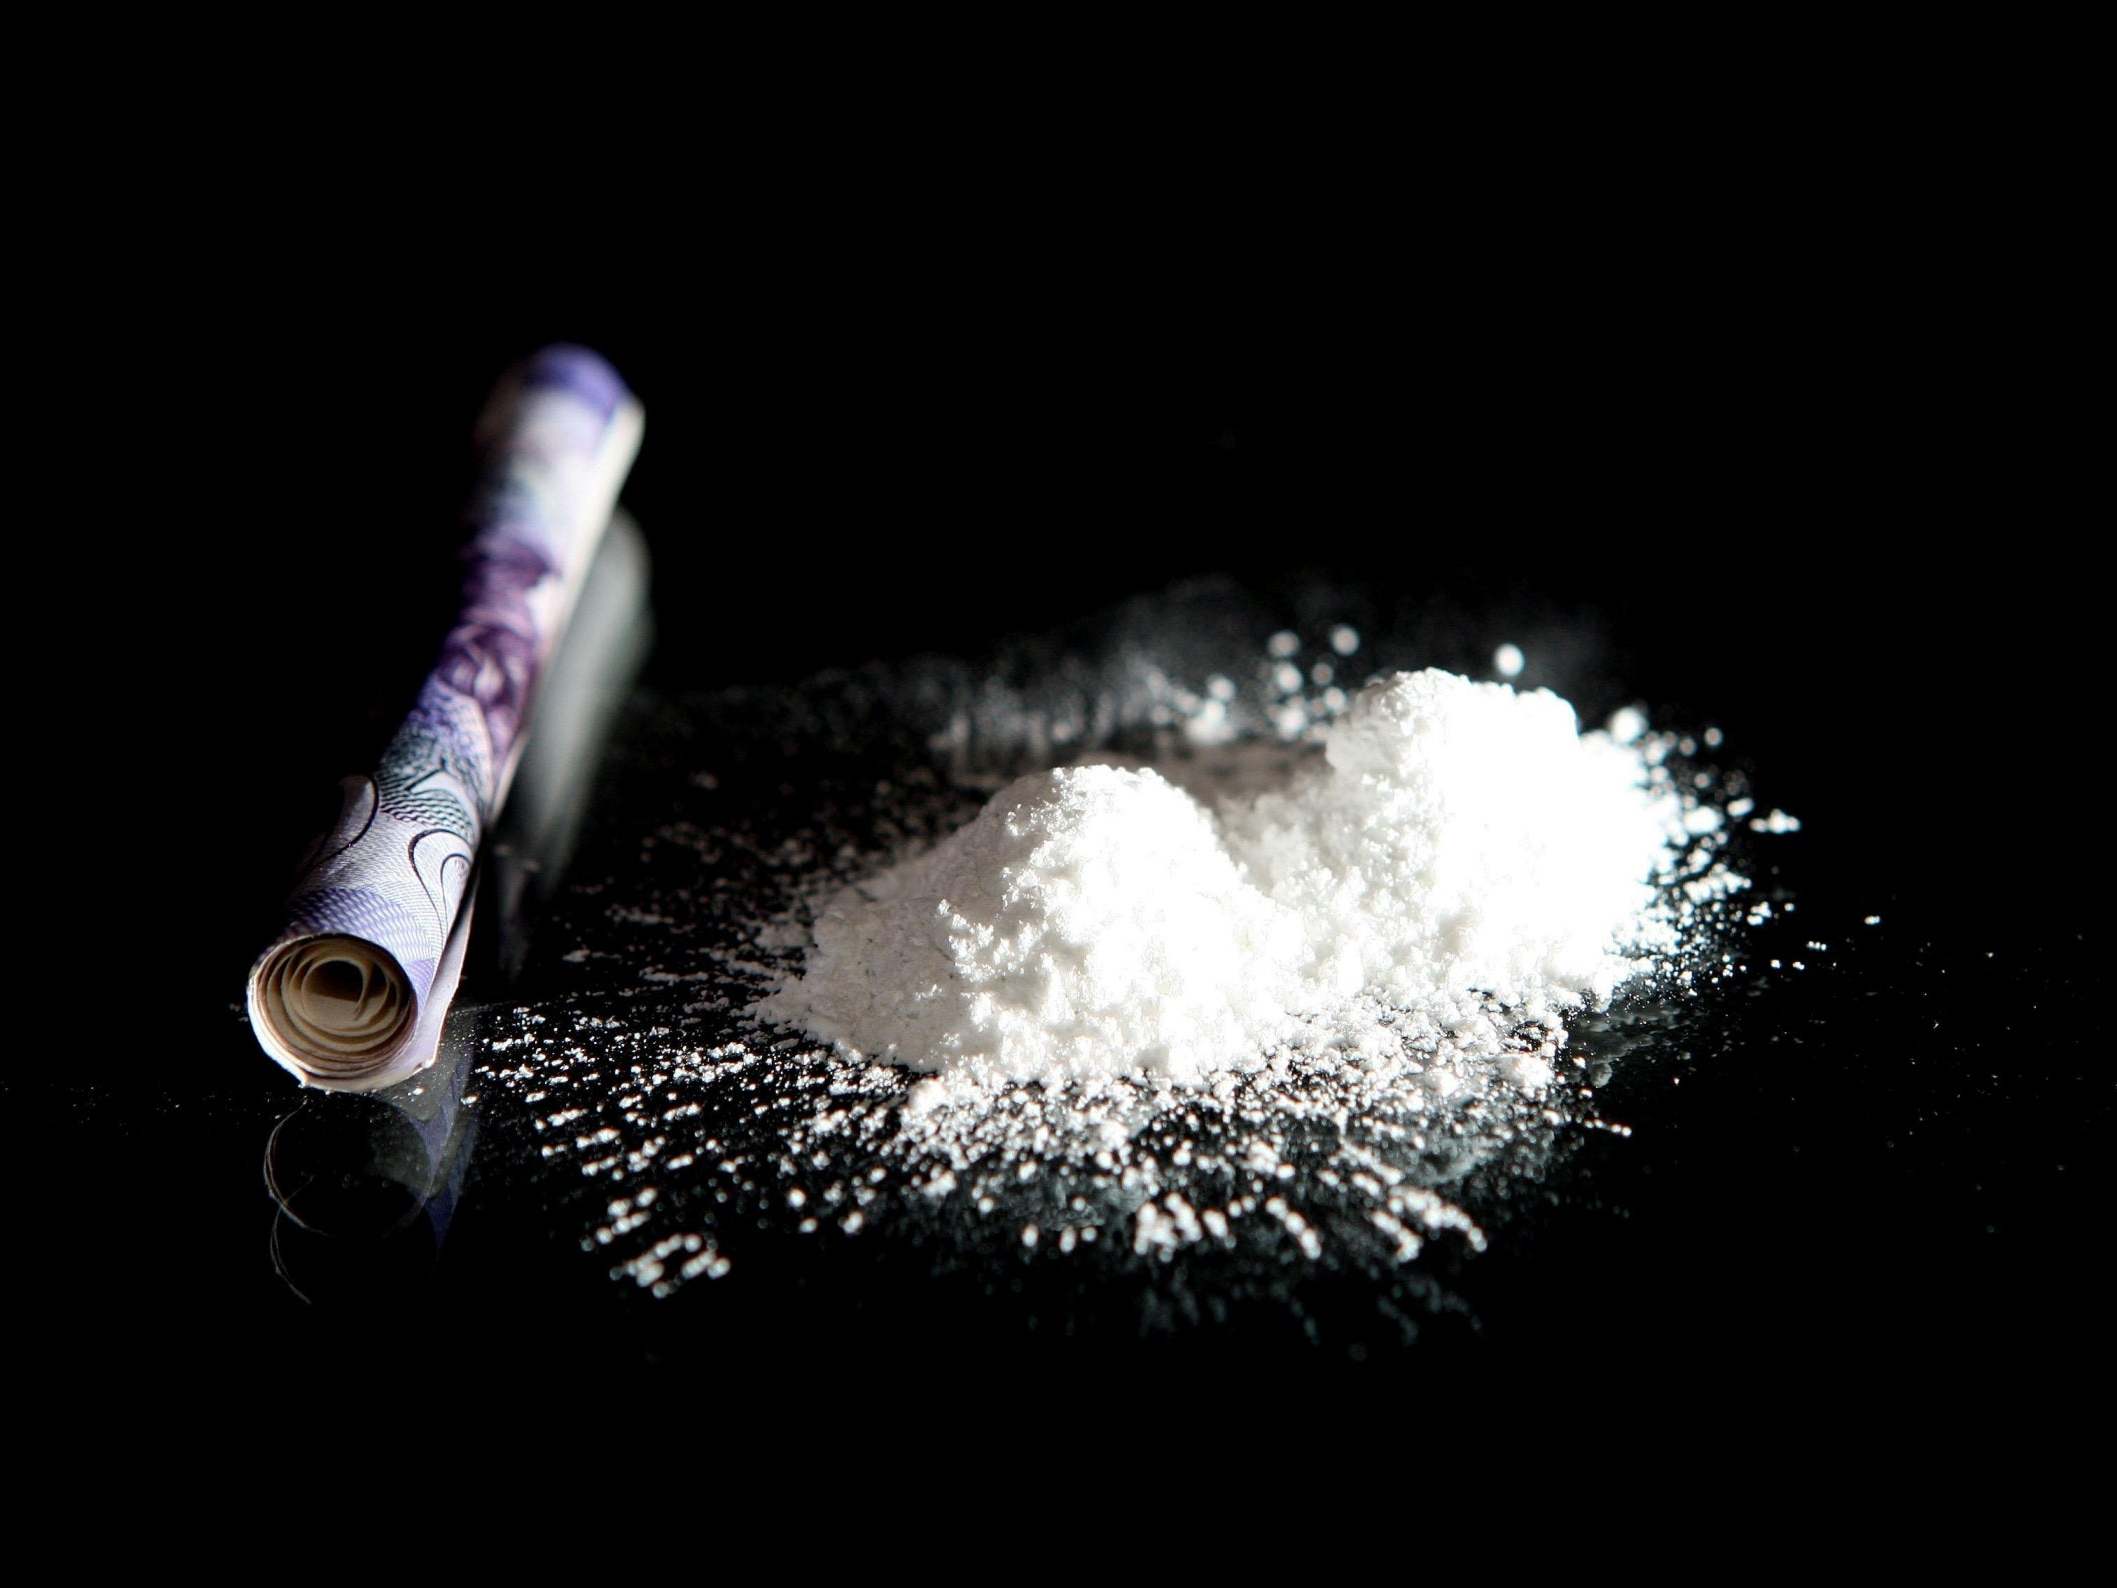 Record class A drug use fuelled by cocaine and ecstasy consumption among young people, figures show